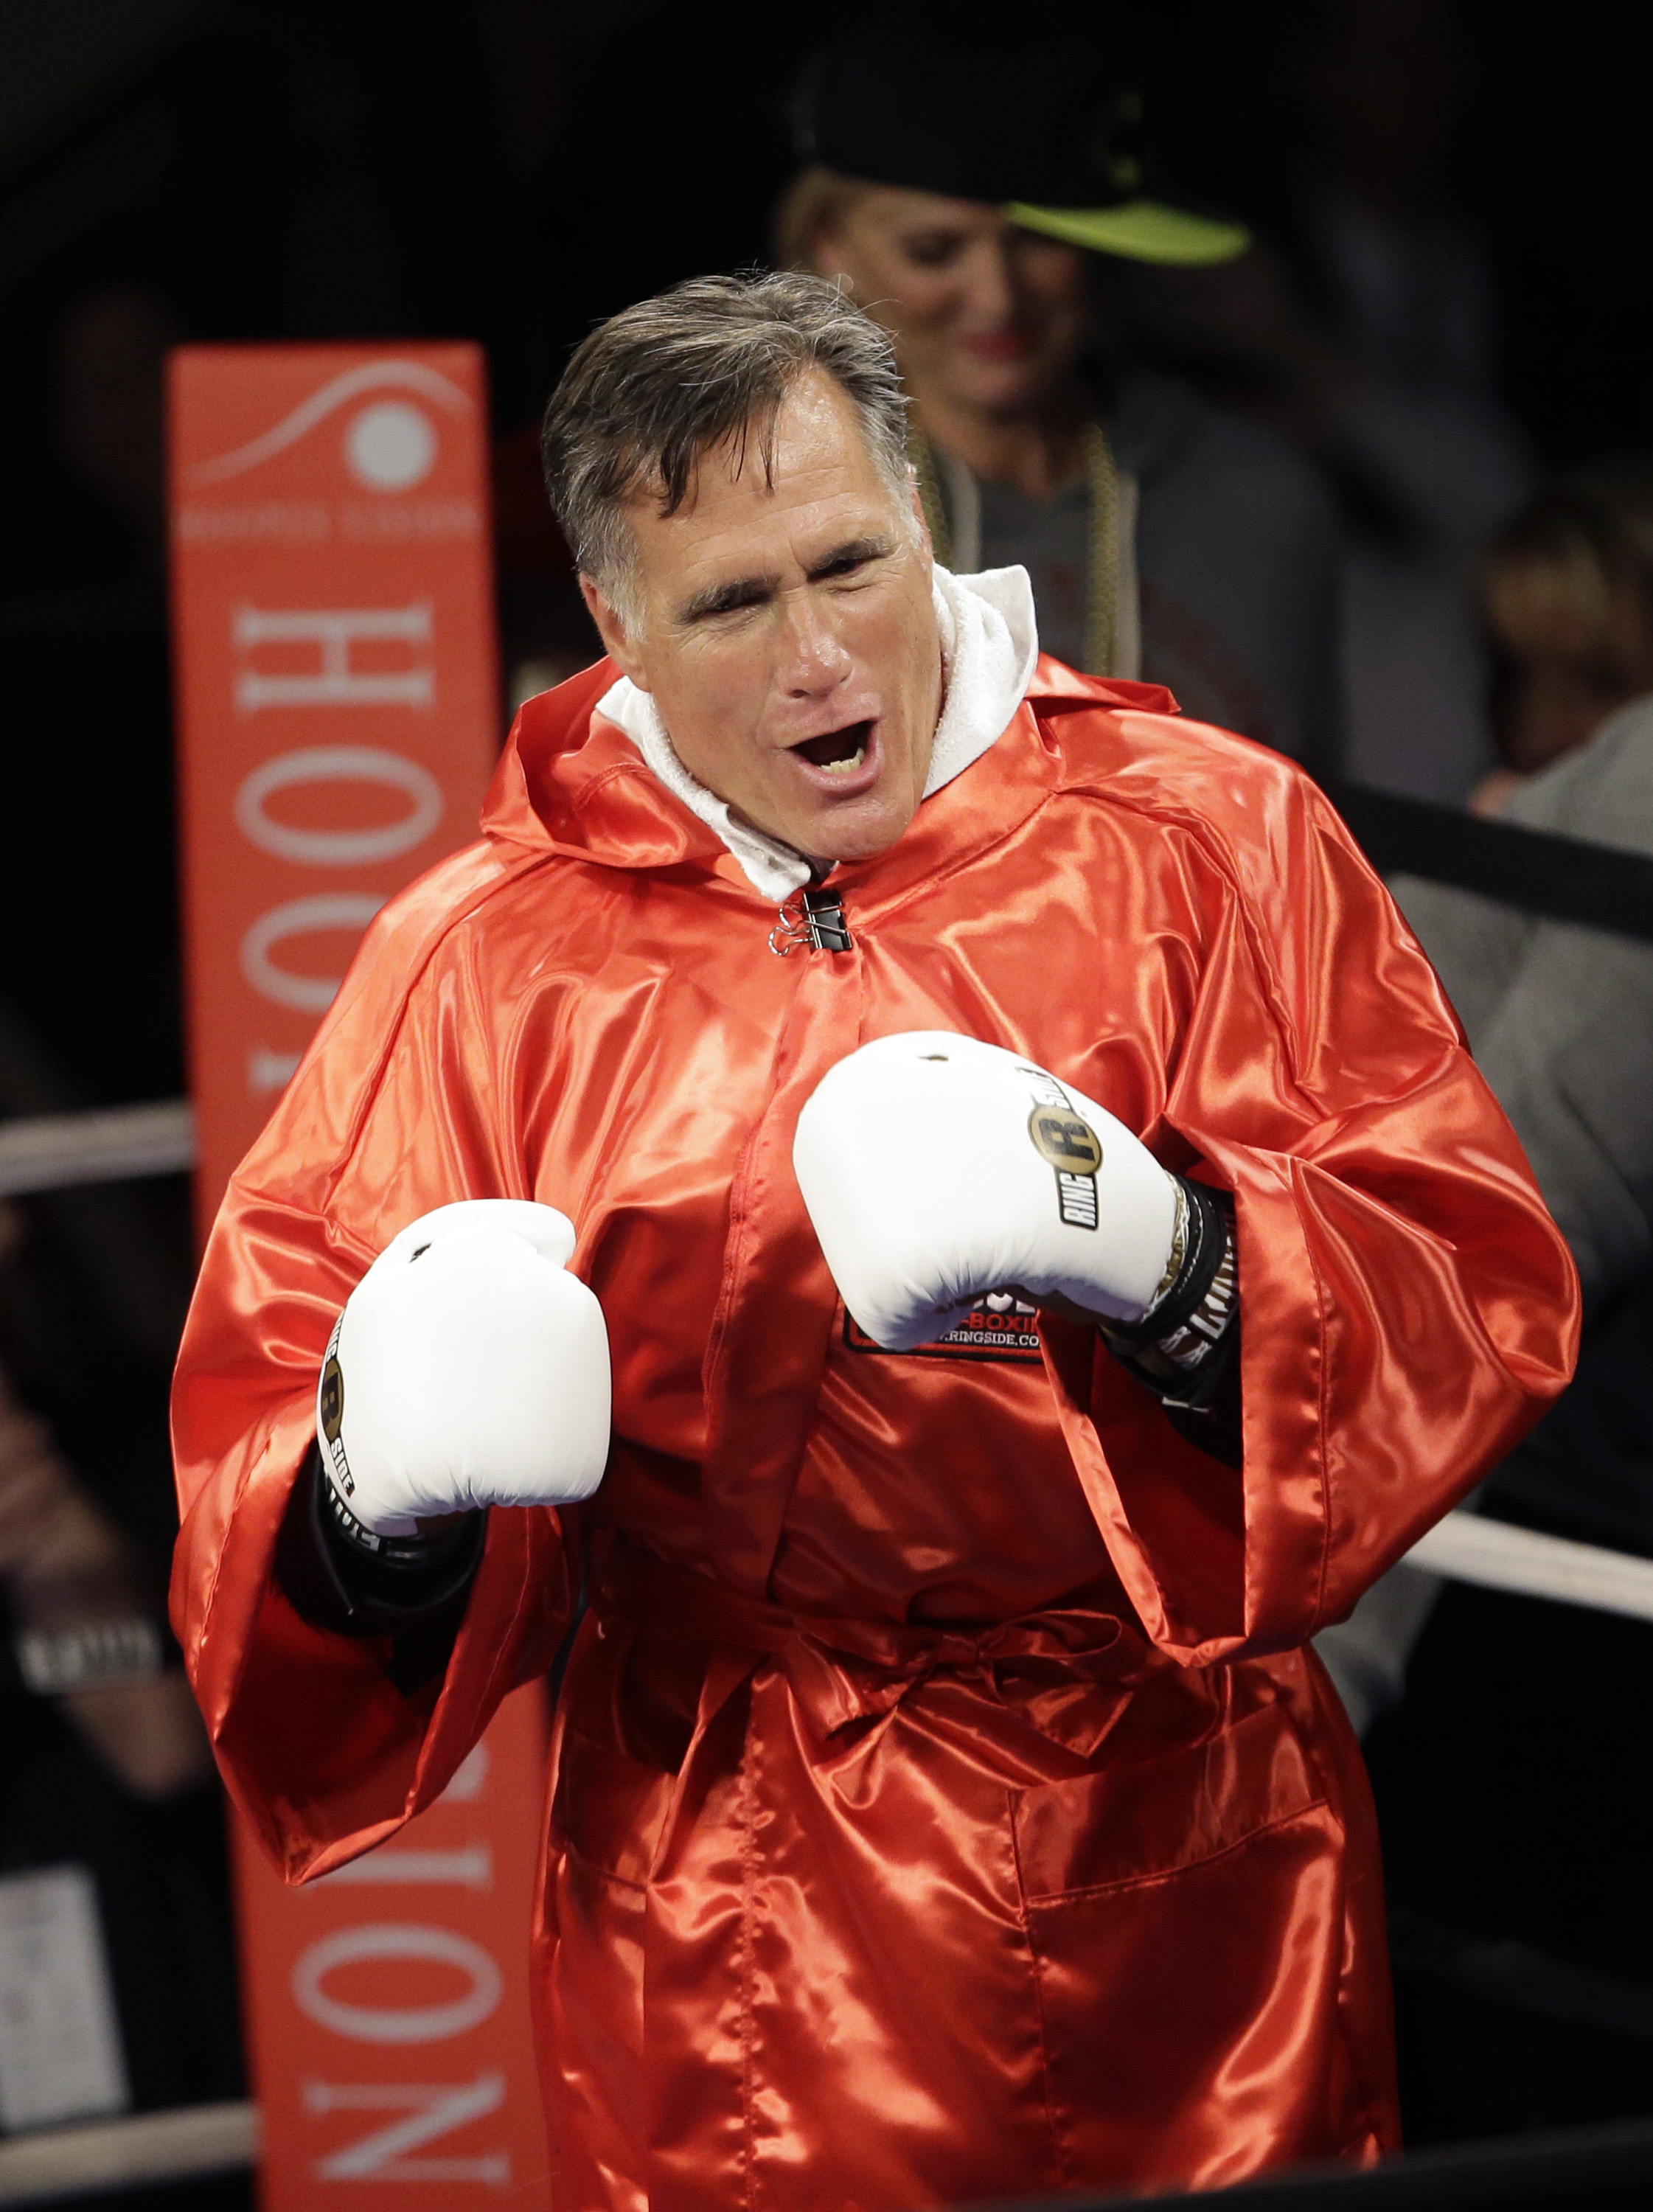 Former Republican presidential candidate Mitt Romney walks in to the ring before sparring with five-time heavyweight boxing champion Evander Holyfield at a charity fight night event on May 15, 2015, in Salt Lake City.